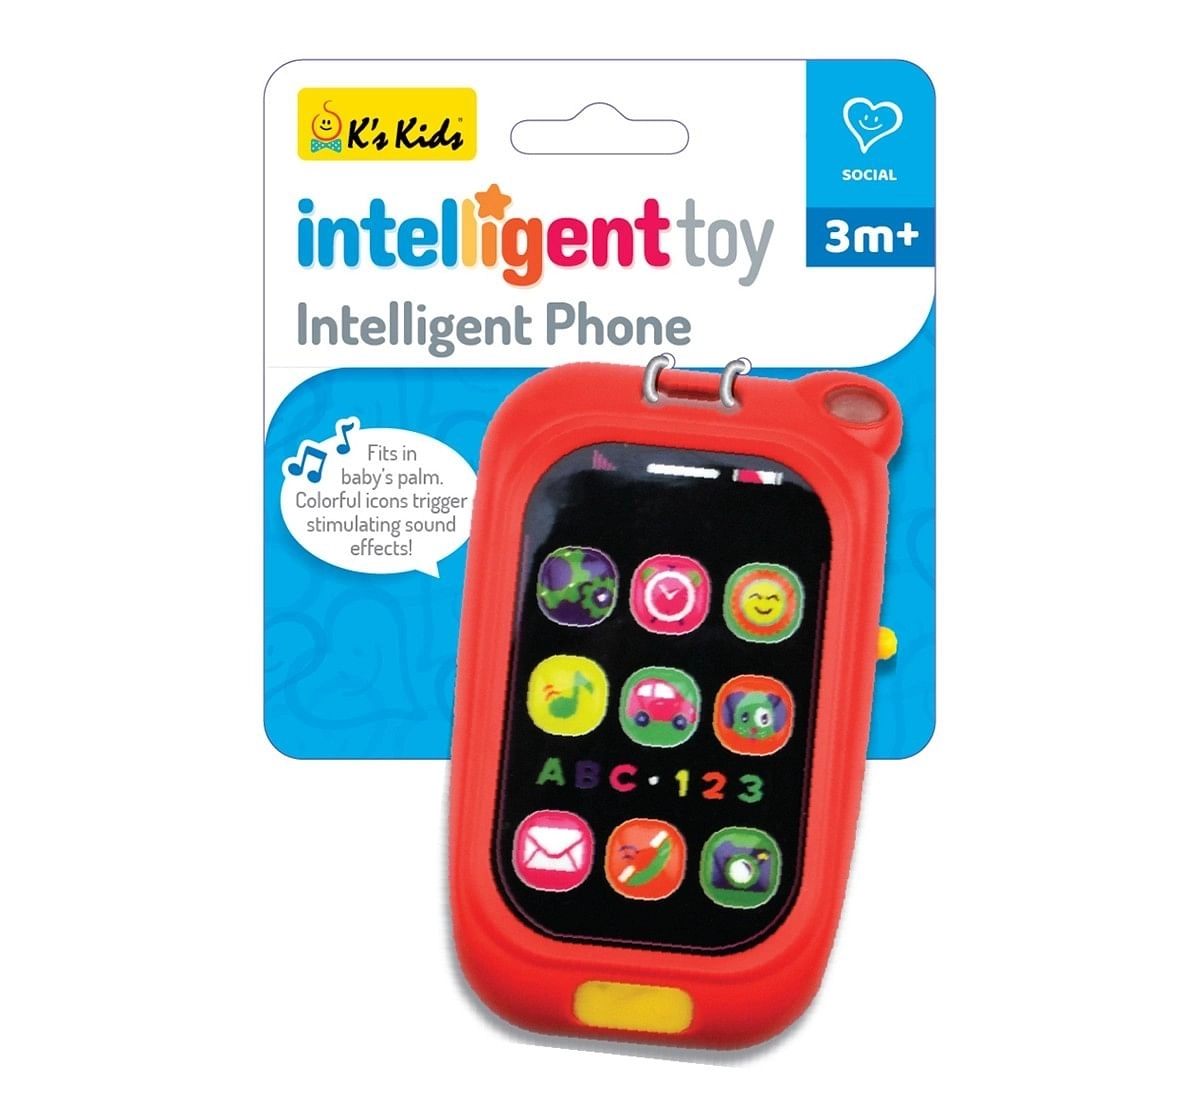 K'S Kids Intelligent Phone - New Born for Kids age 3M+ (Red)